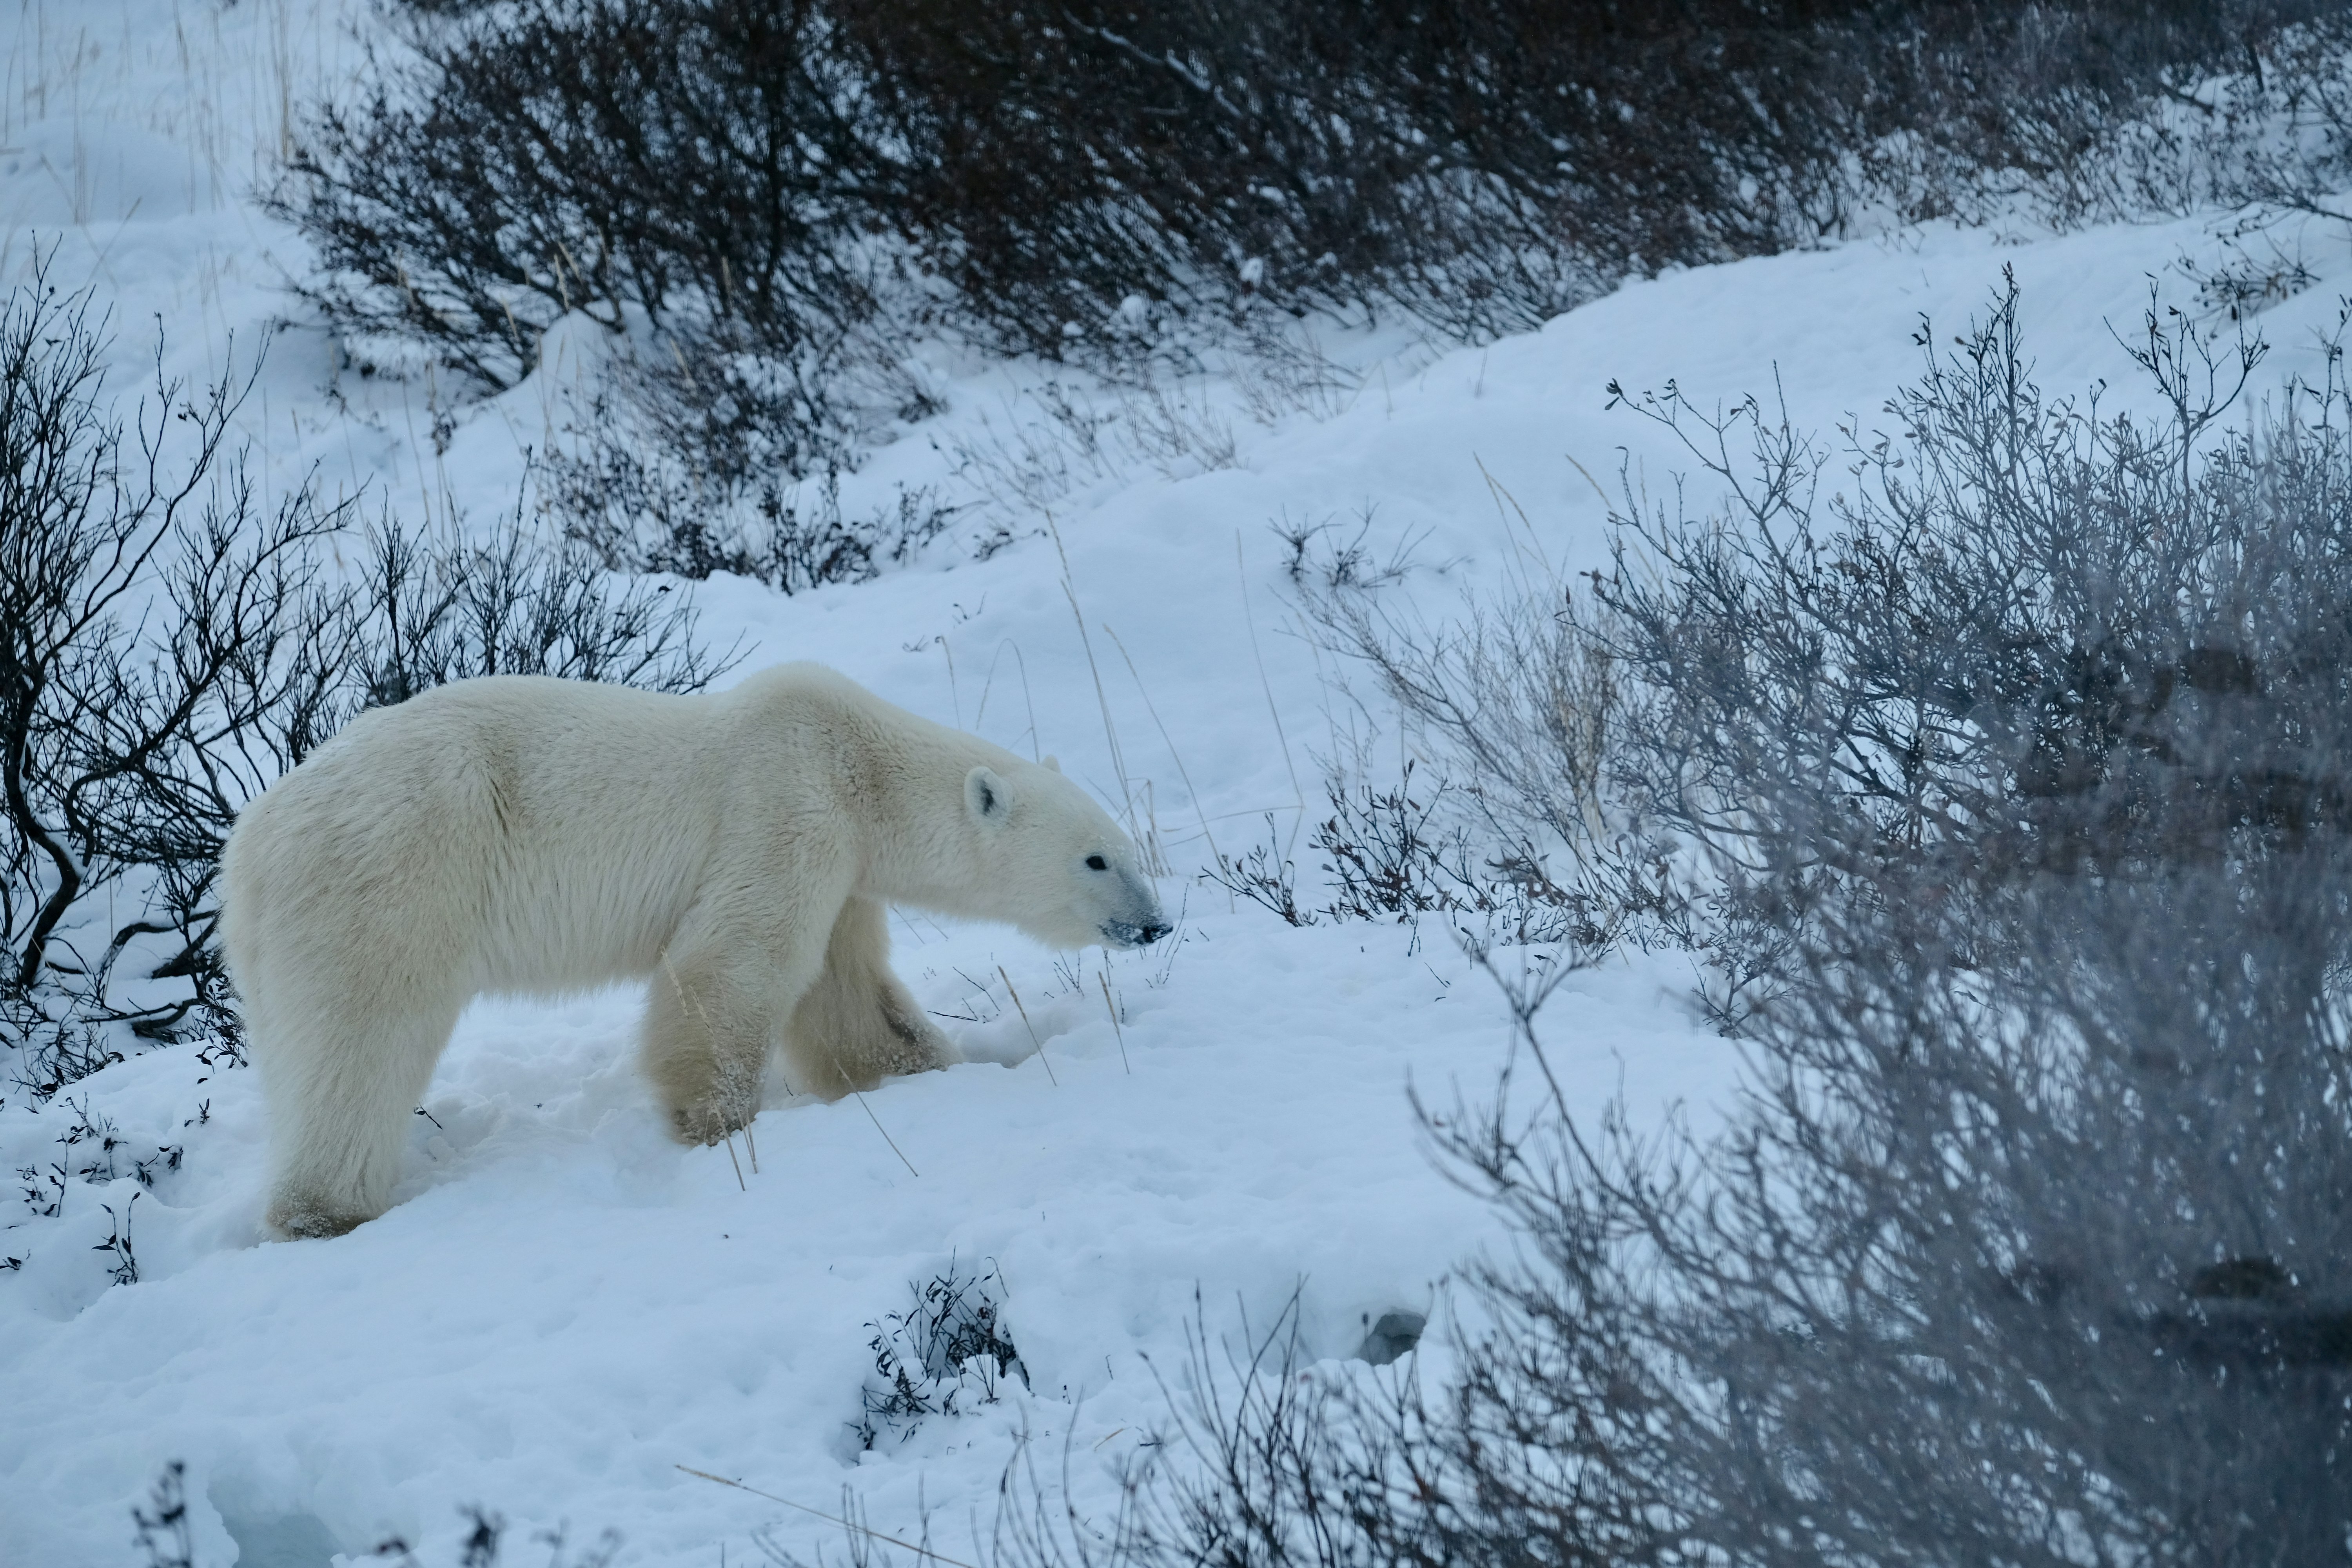 A polar bear appears the sniff the snowy ground as it makes its way slowly uphill through a landscape of low scrub and uneven snow